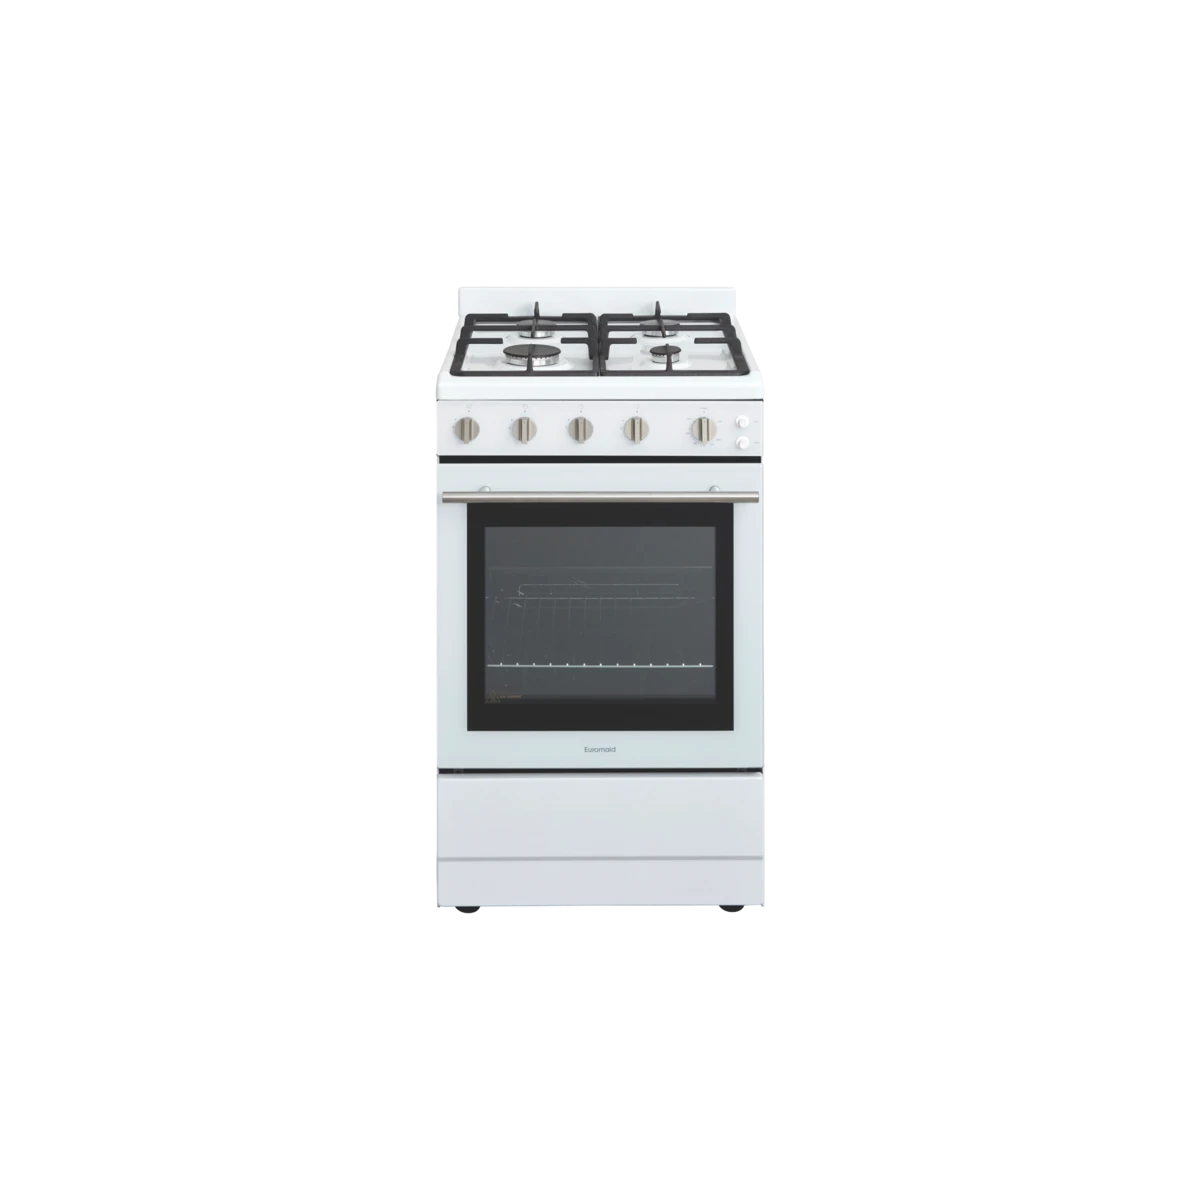 Euromaid 540mm Upright Gas Cooker User Manual